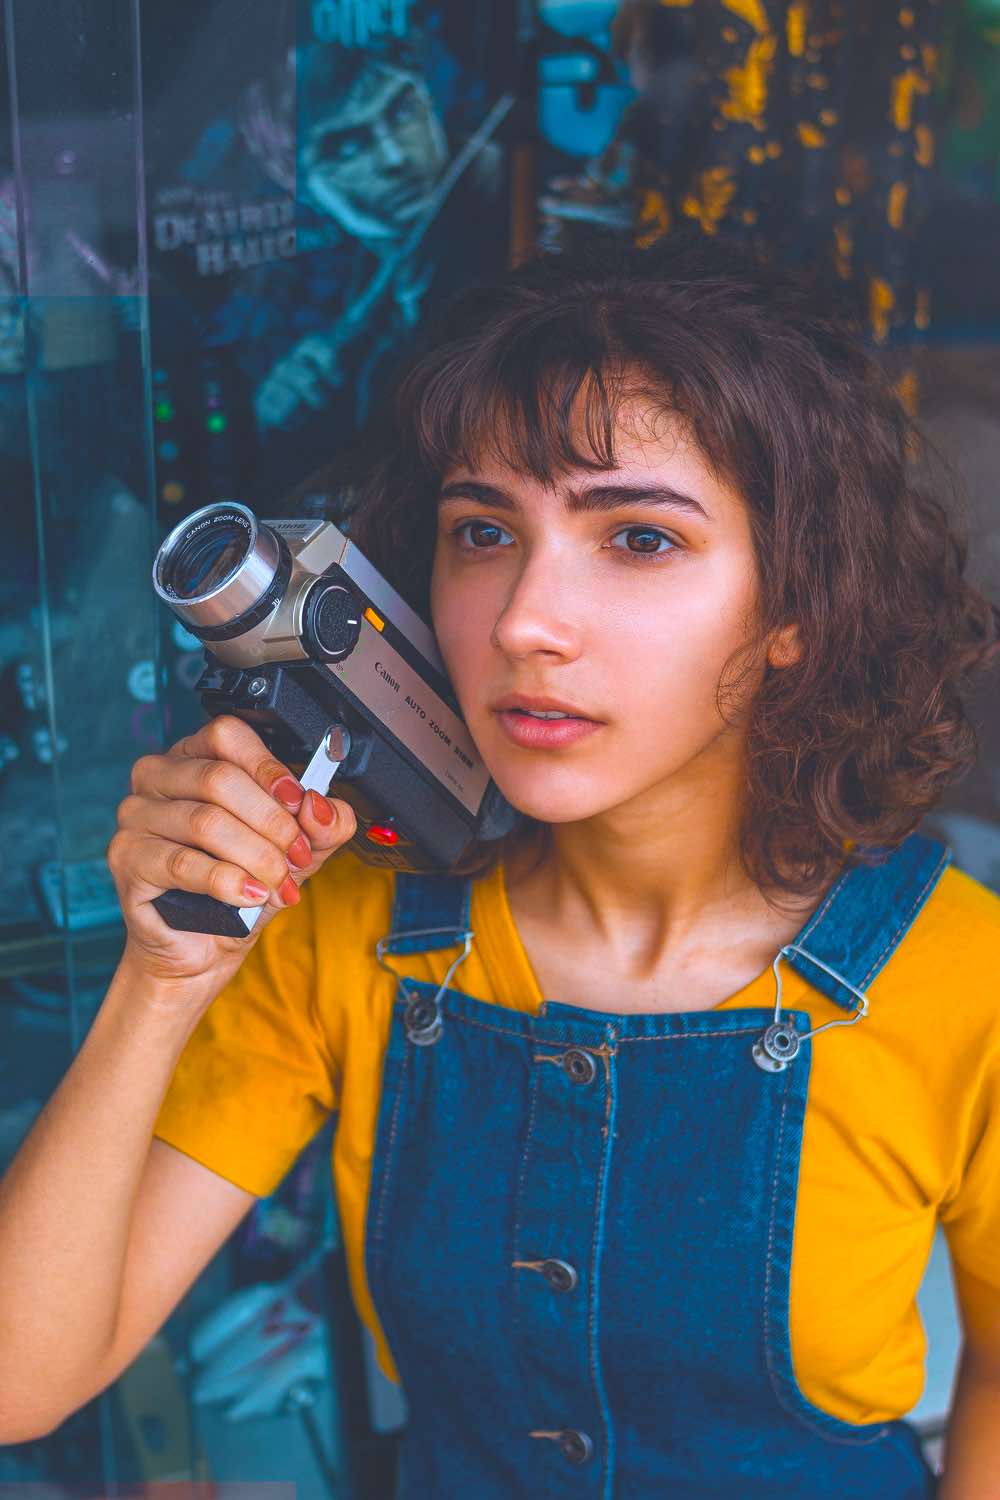 Woman Holding Video Camera | 13 Cute College Outfit Ideas That'll Make You Look Trendy